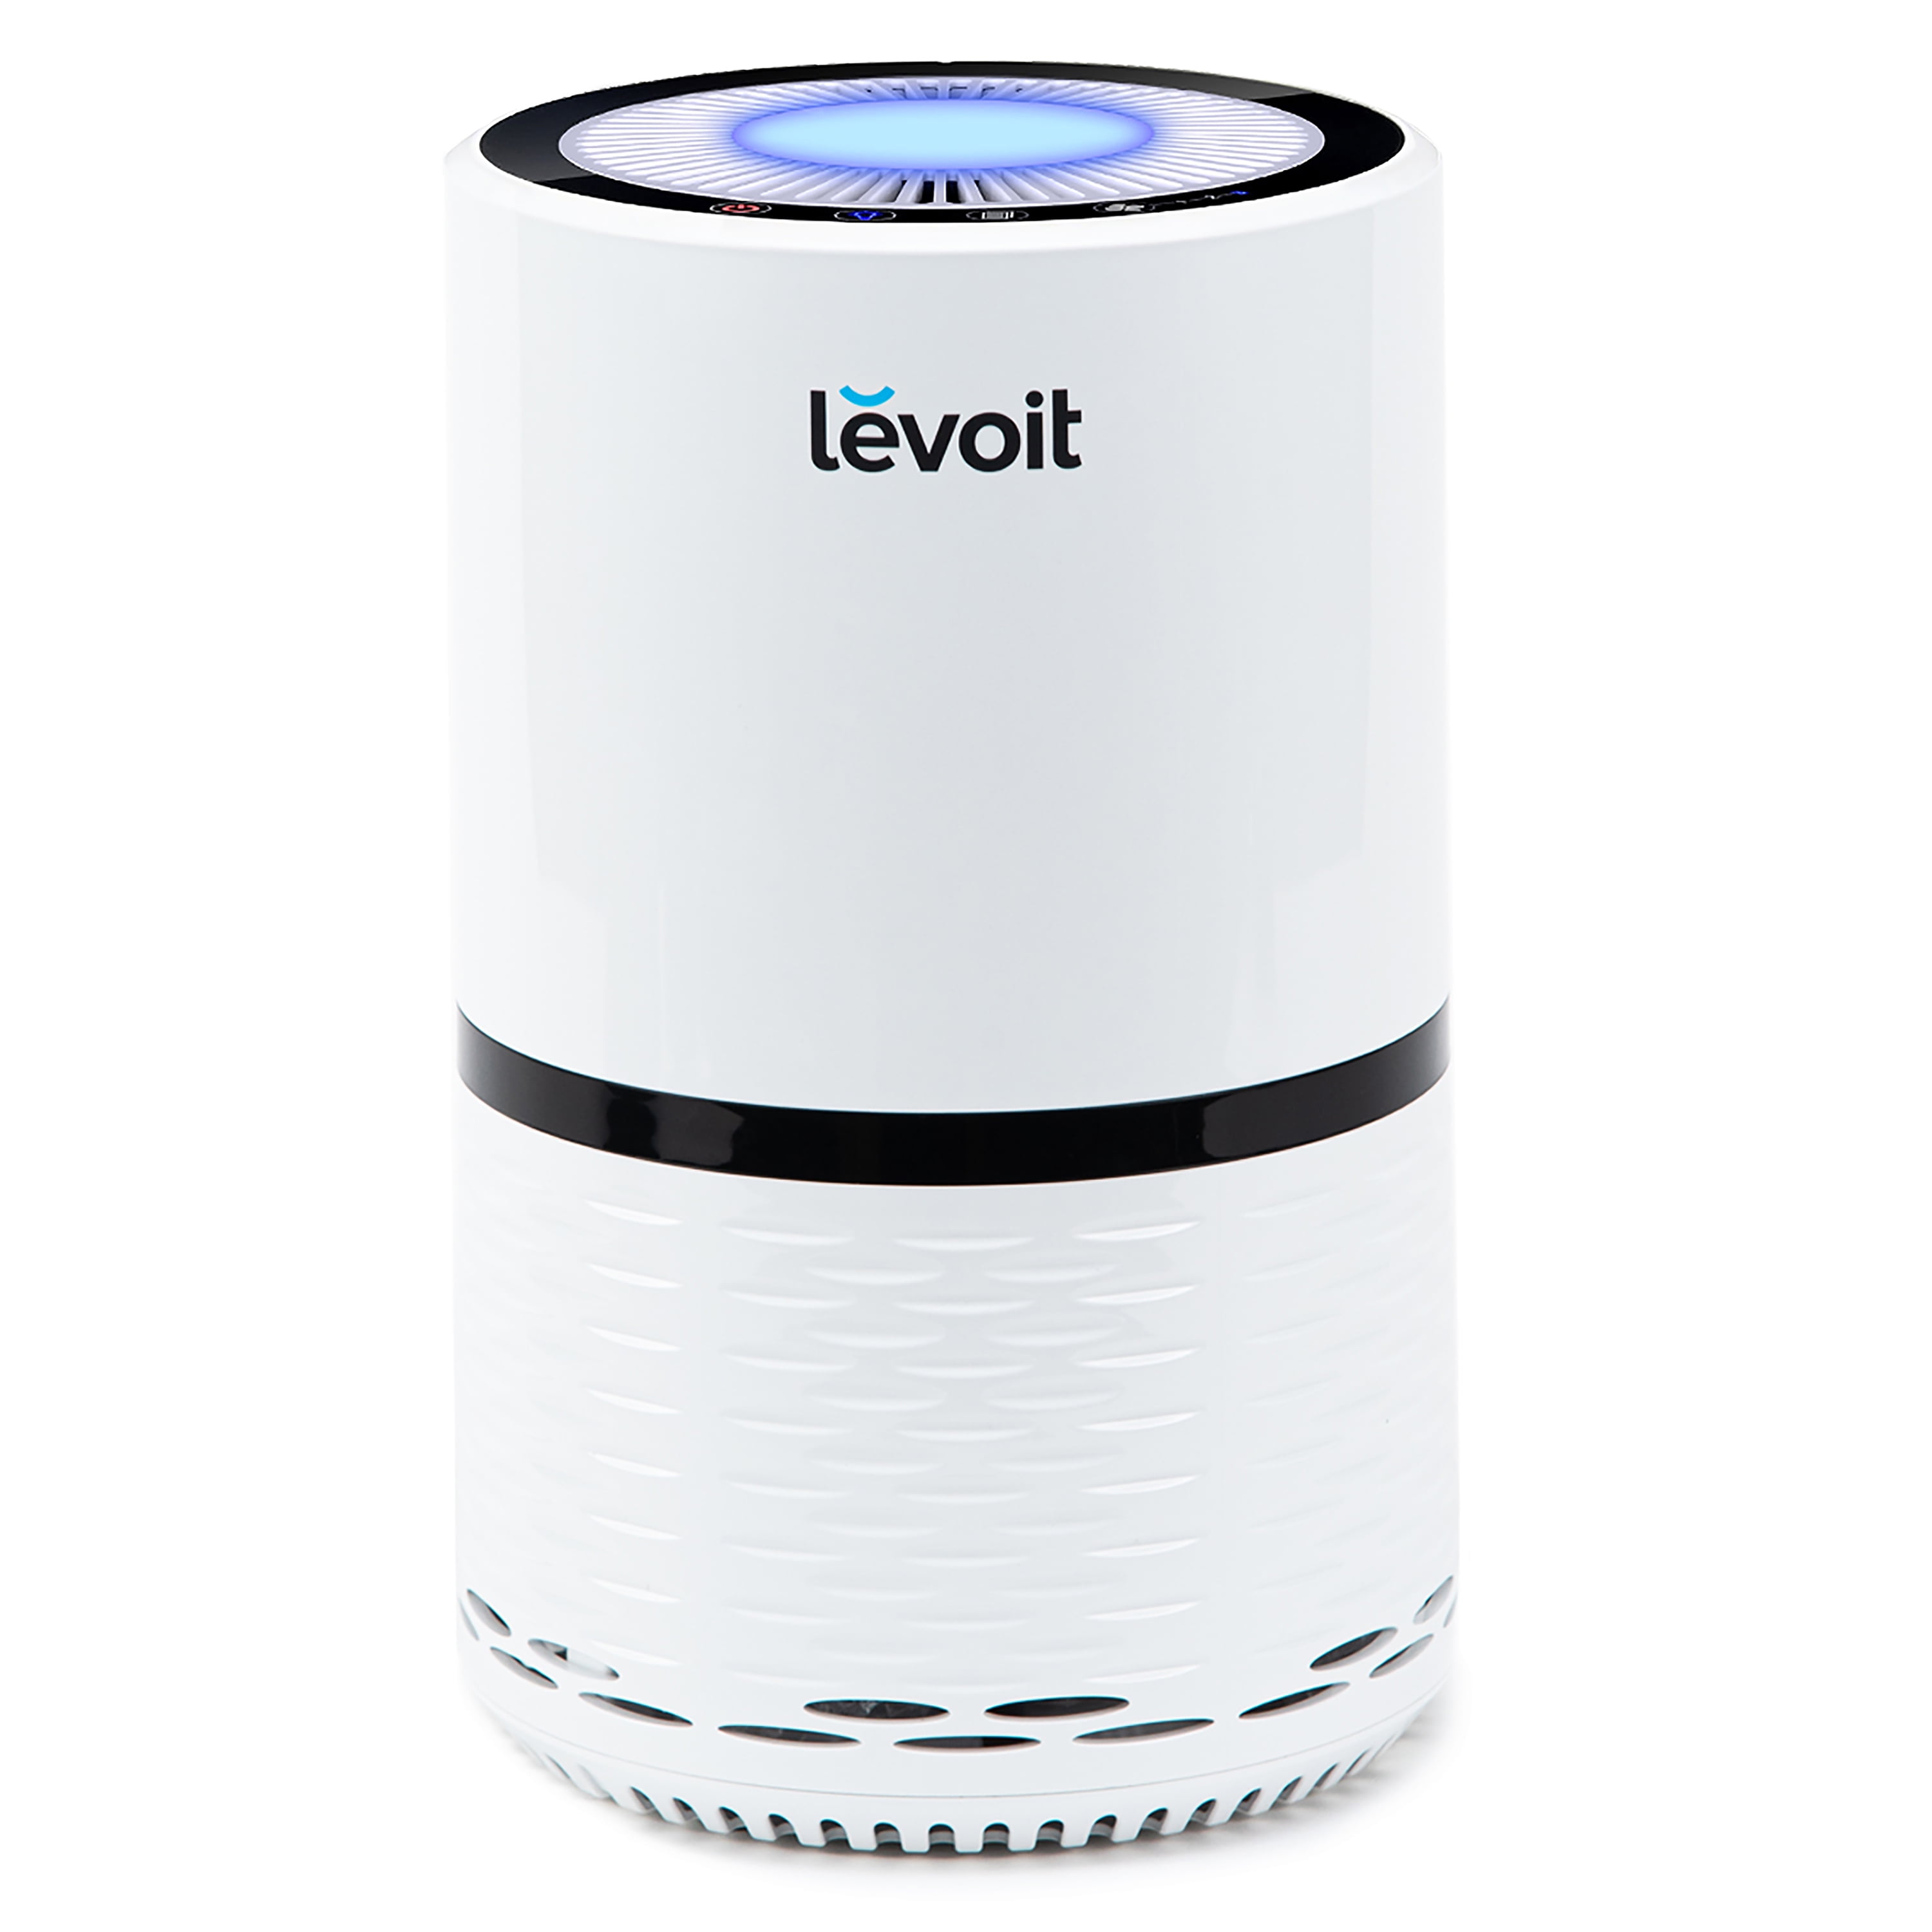 Levoit LV-H132 Air Purifier with True HEPA Filter - White 817915020869